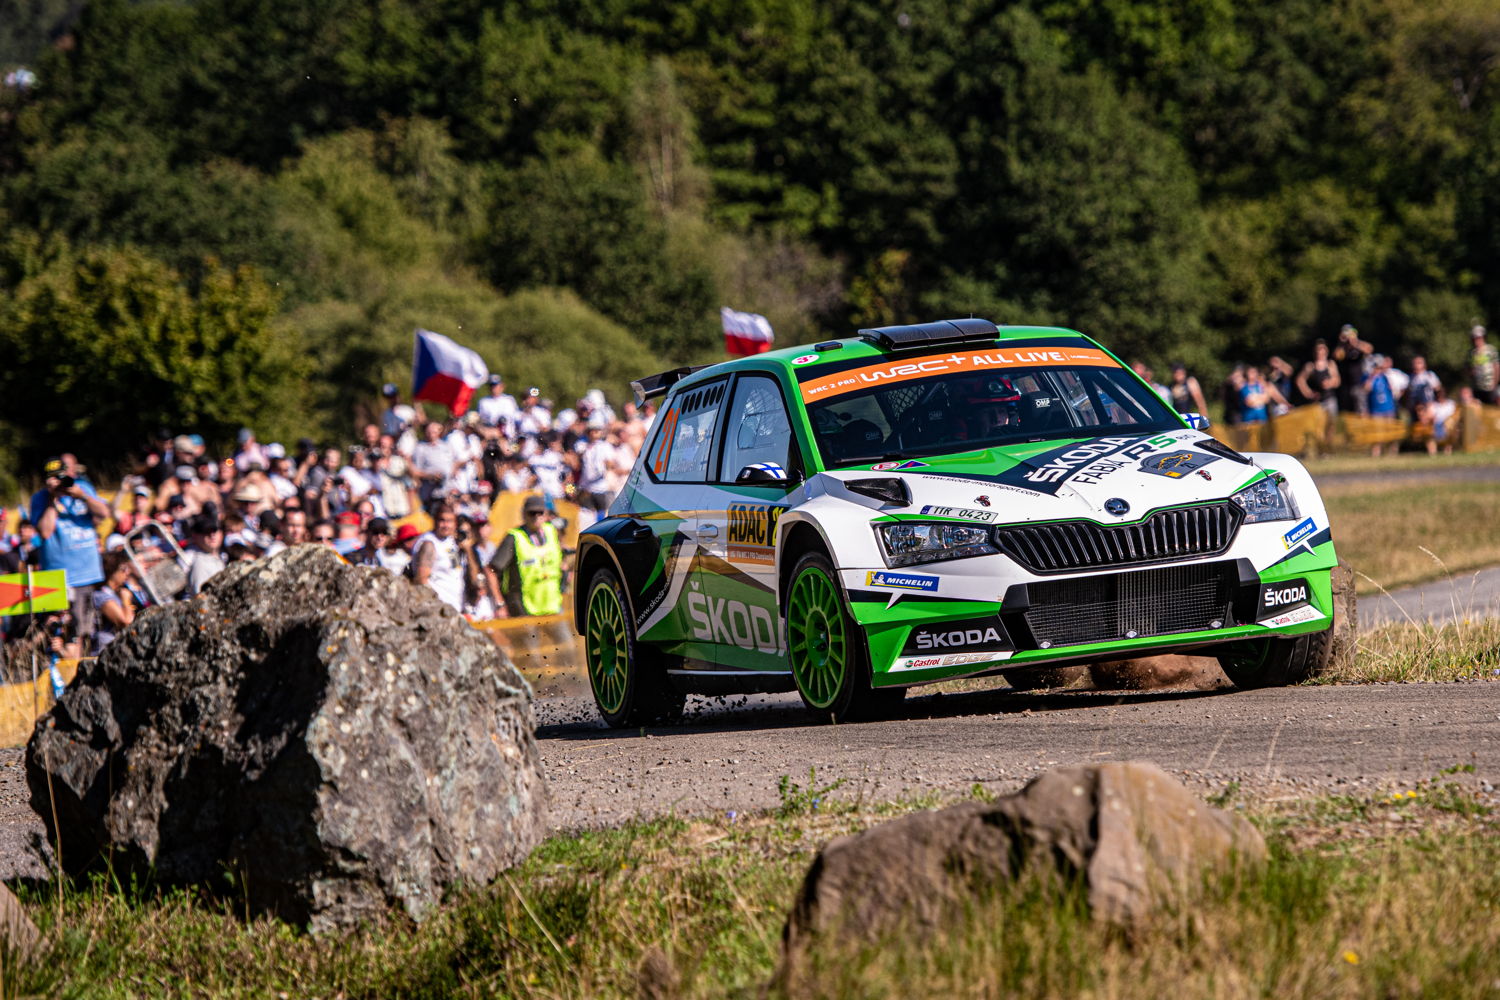 Kalle Rovanperä/Jonne Halttunen drove their ŠKODA FABIA R5 evo to third position in the WRC 2 Pro category and increased the lead in the championship standings